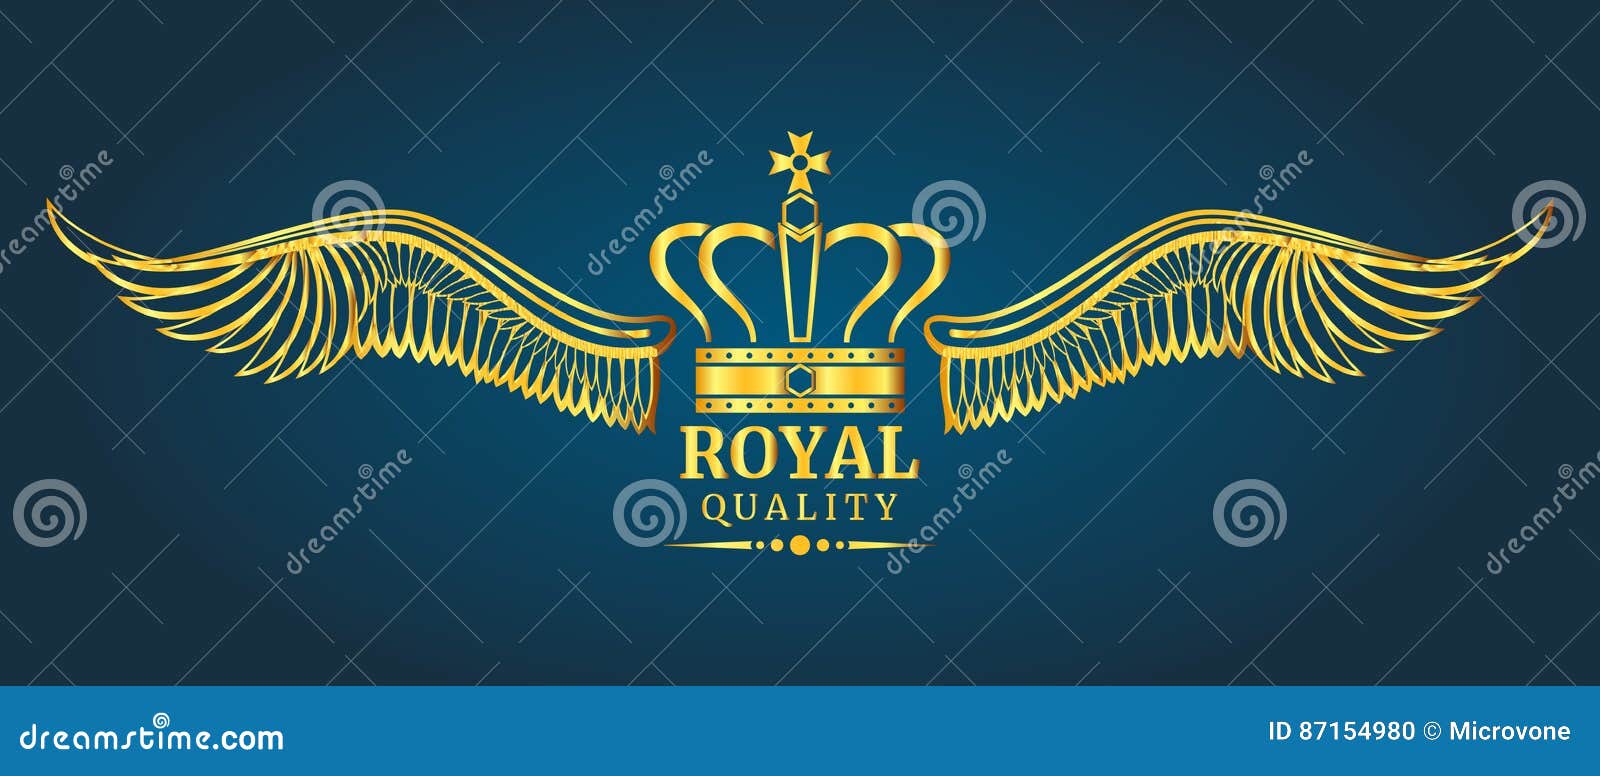 Download Golden Vector Crown Royal Quality Logo Template Stock ...